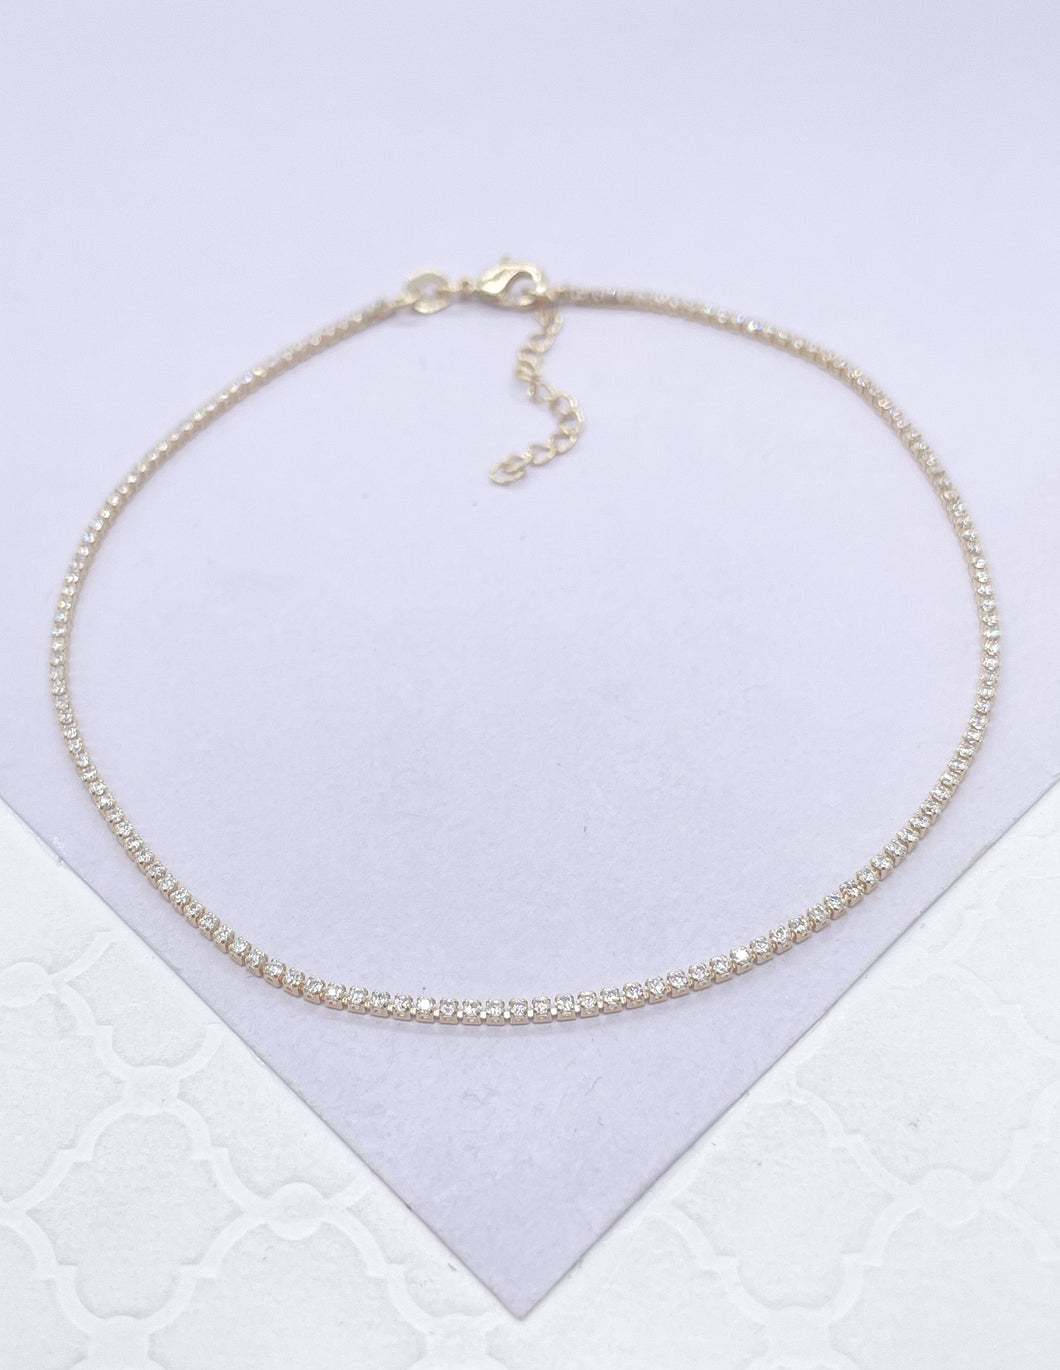 18k Gold Filled Dainty Ultra-Thin Tennis Chain Anklet, Summer Jewelry, Body Jewelry